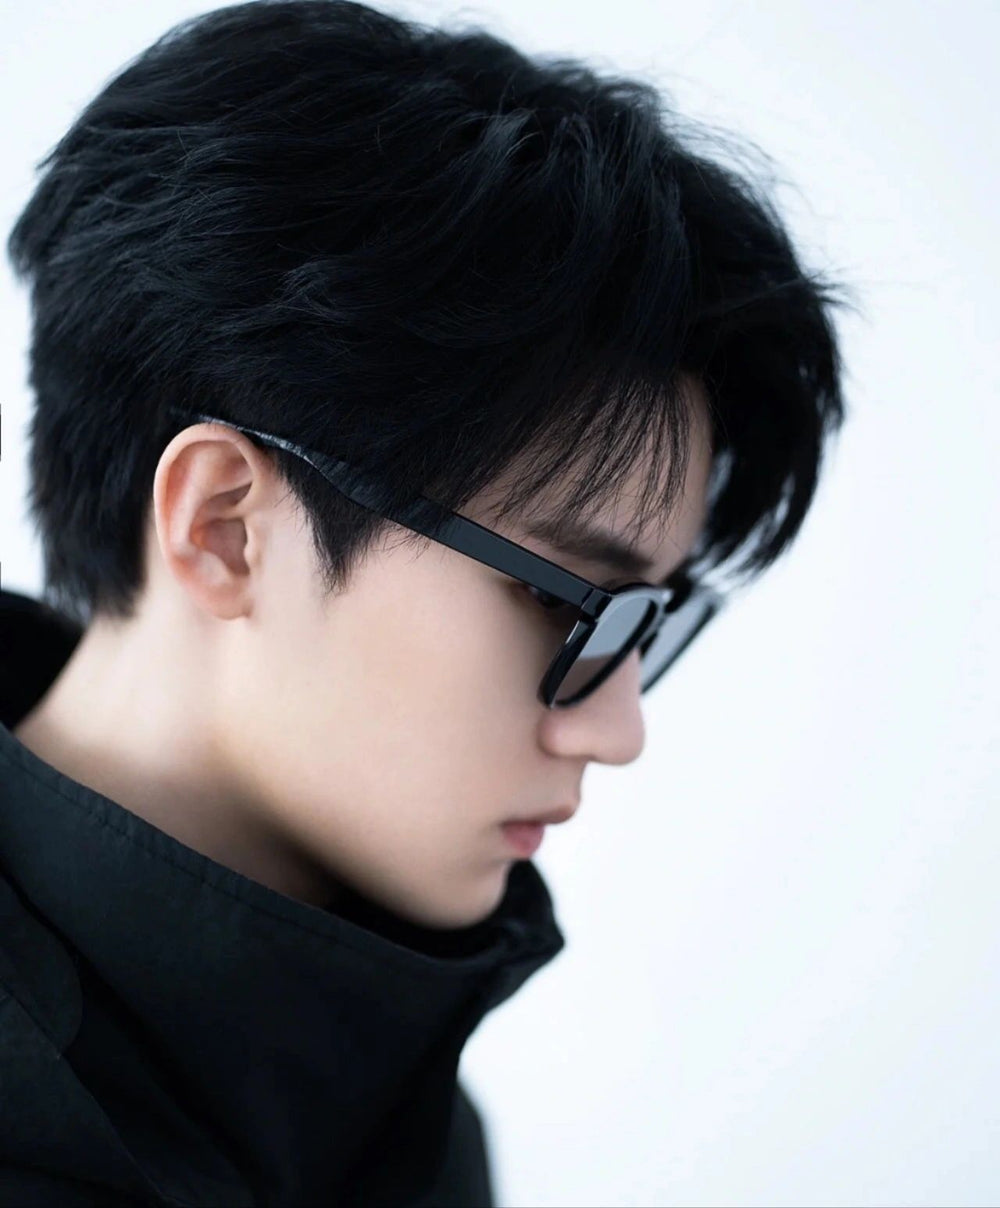 A stylish man with black hair and sunglasses looking downwards.